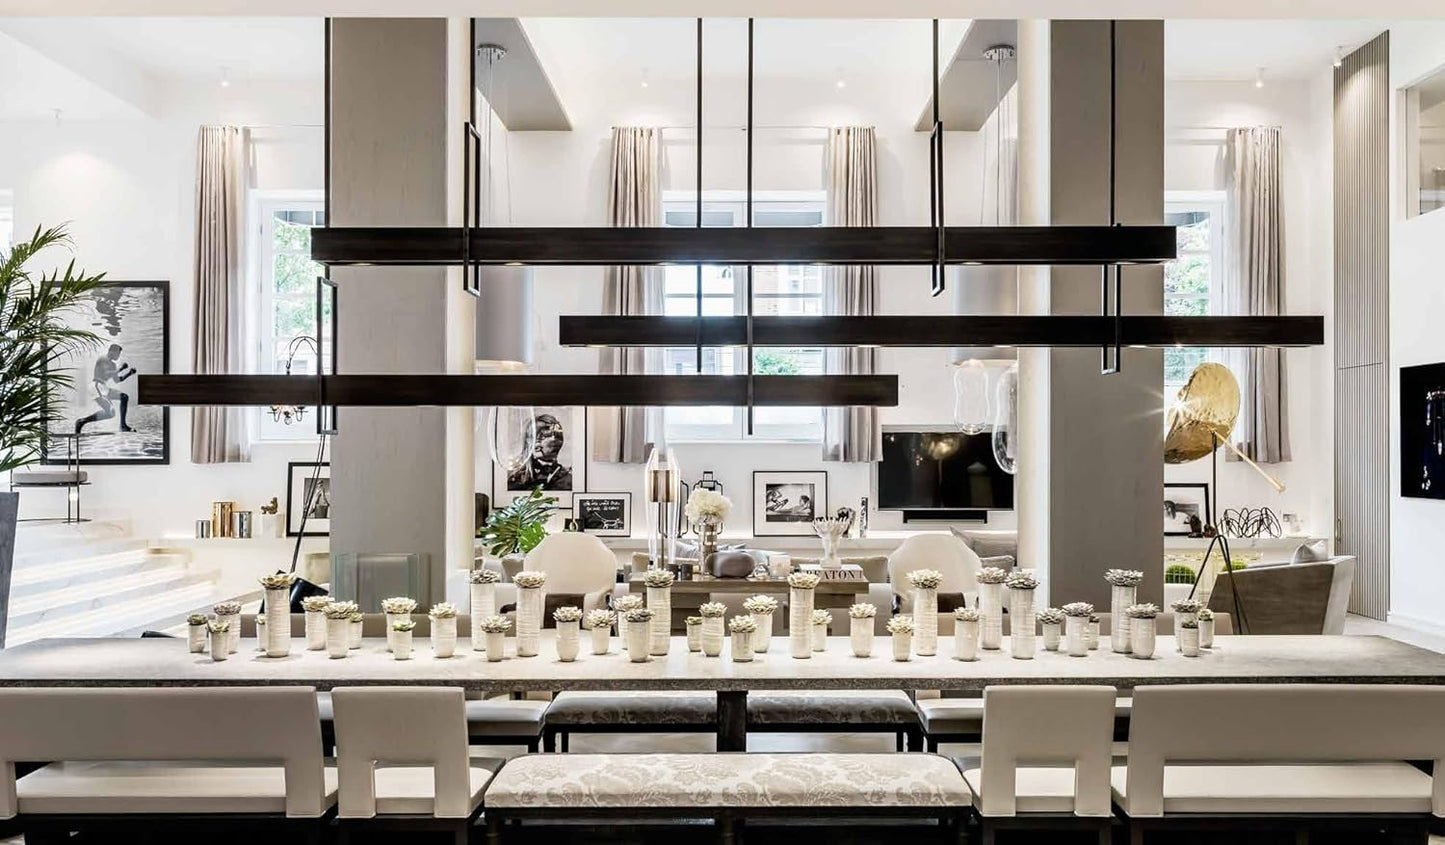 Exclusive Signed Edition: Kelly Hoppen's 'House of Hoppen' Book